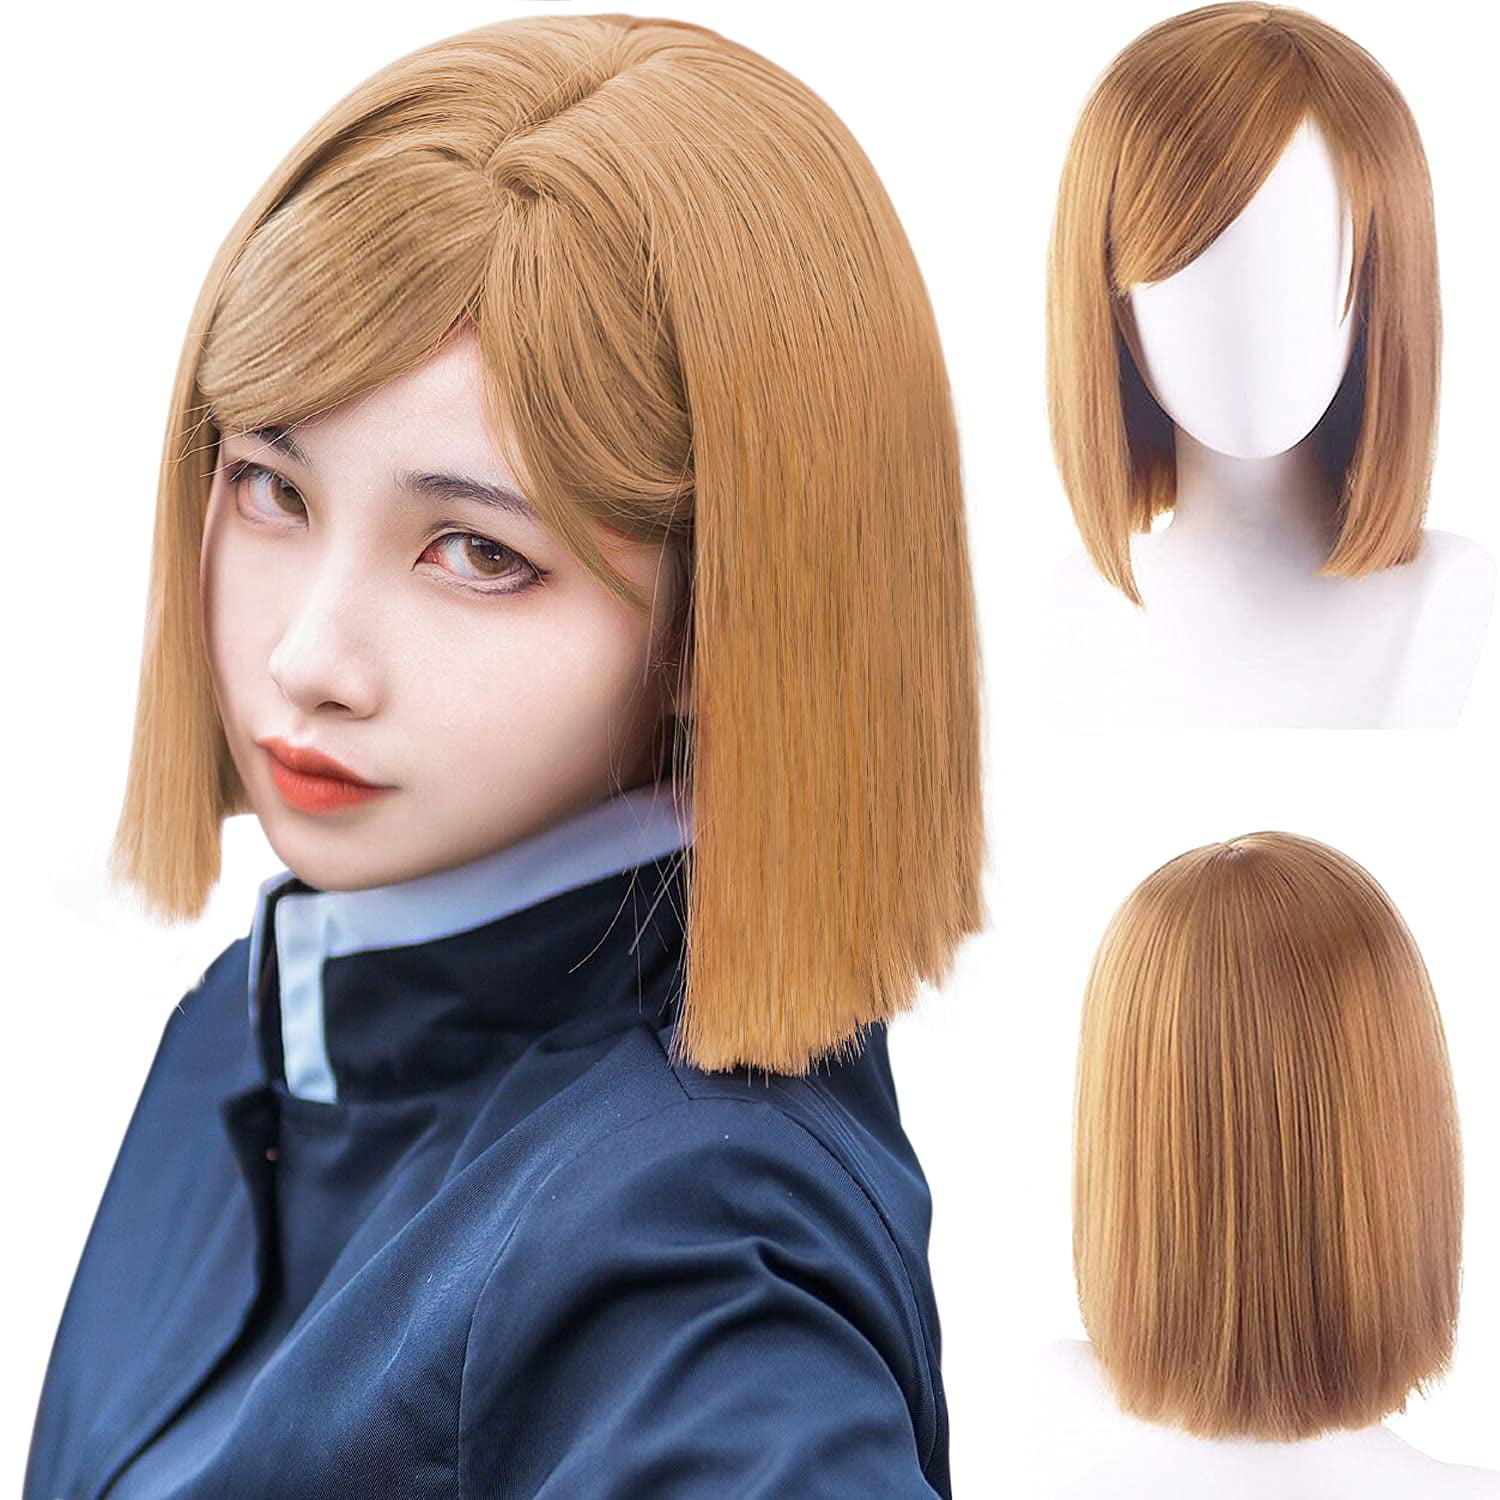 Free Cap + Brown Wig for Women Girls Kids Short Bob Cosplay Wigs with Bangs Synthetic  Hair Wigs for Anime | Walmart Canada